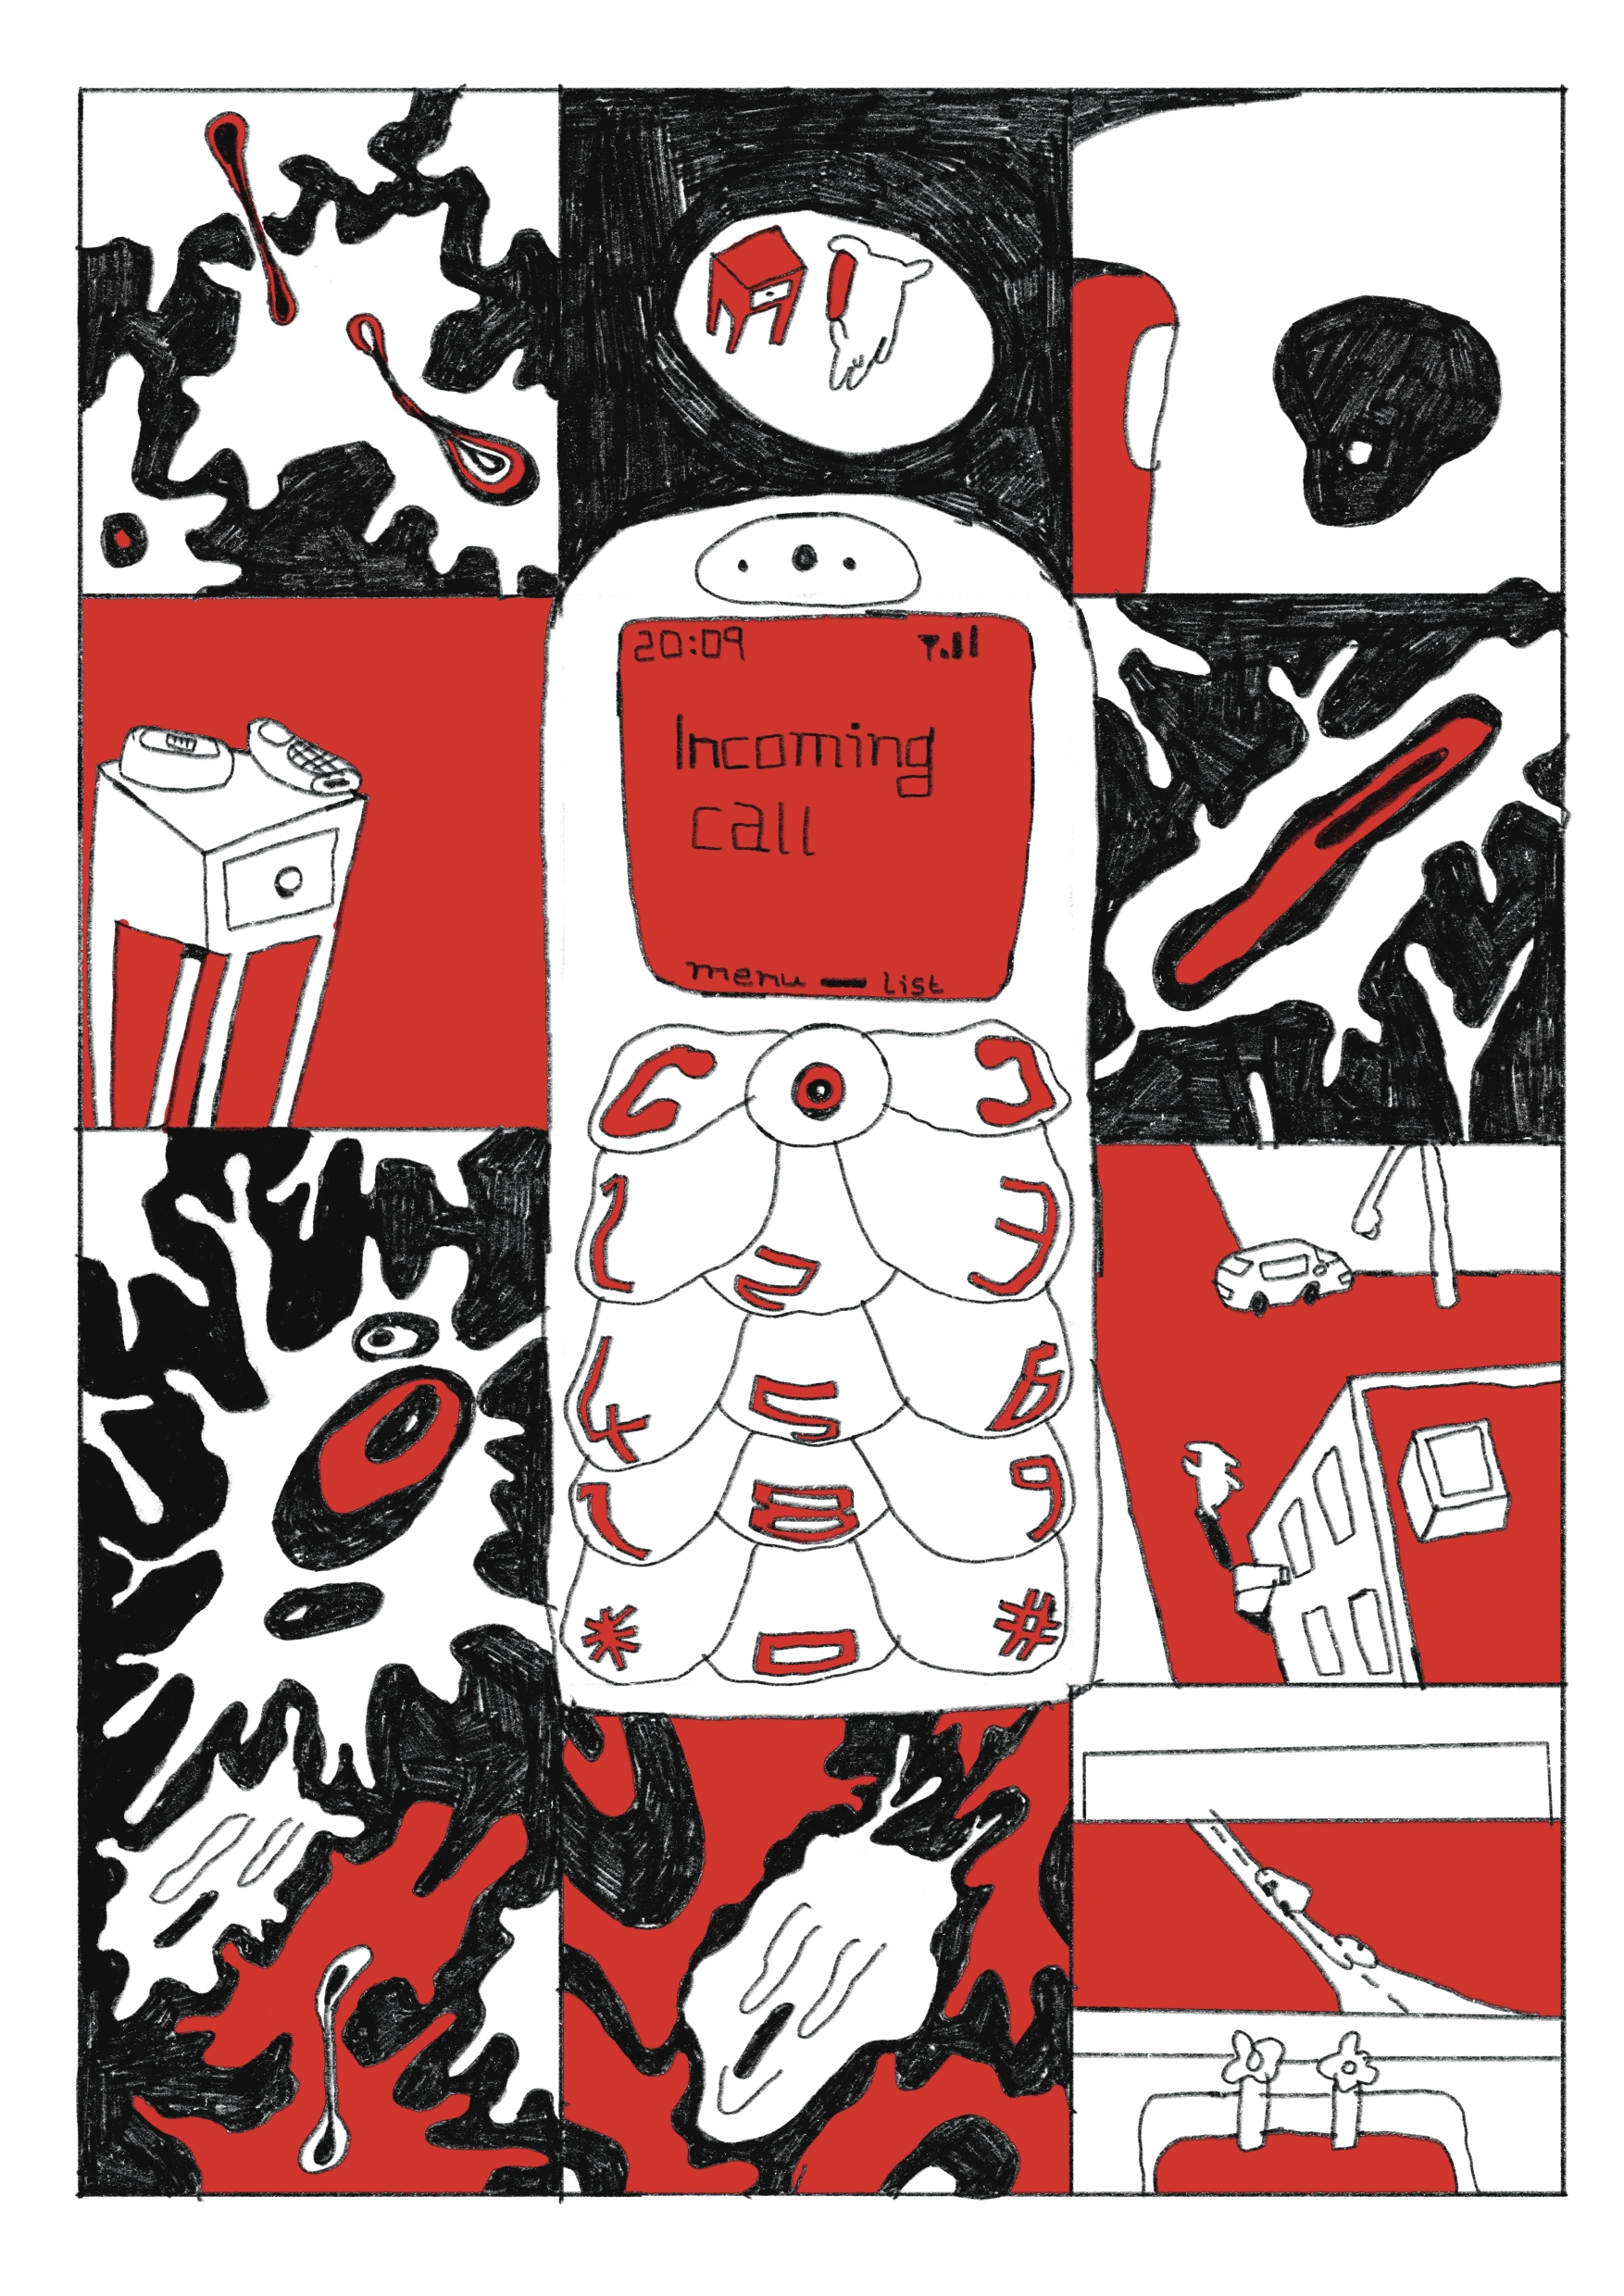 Digital illustration of phone ringing in red, black and white panels.